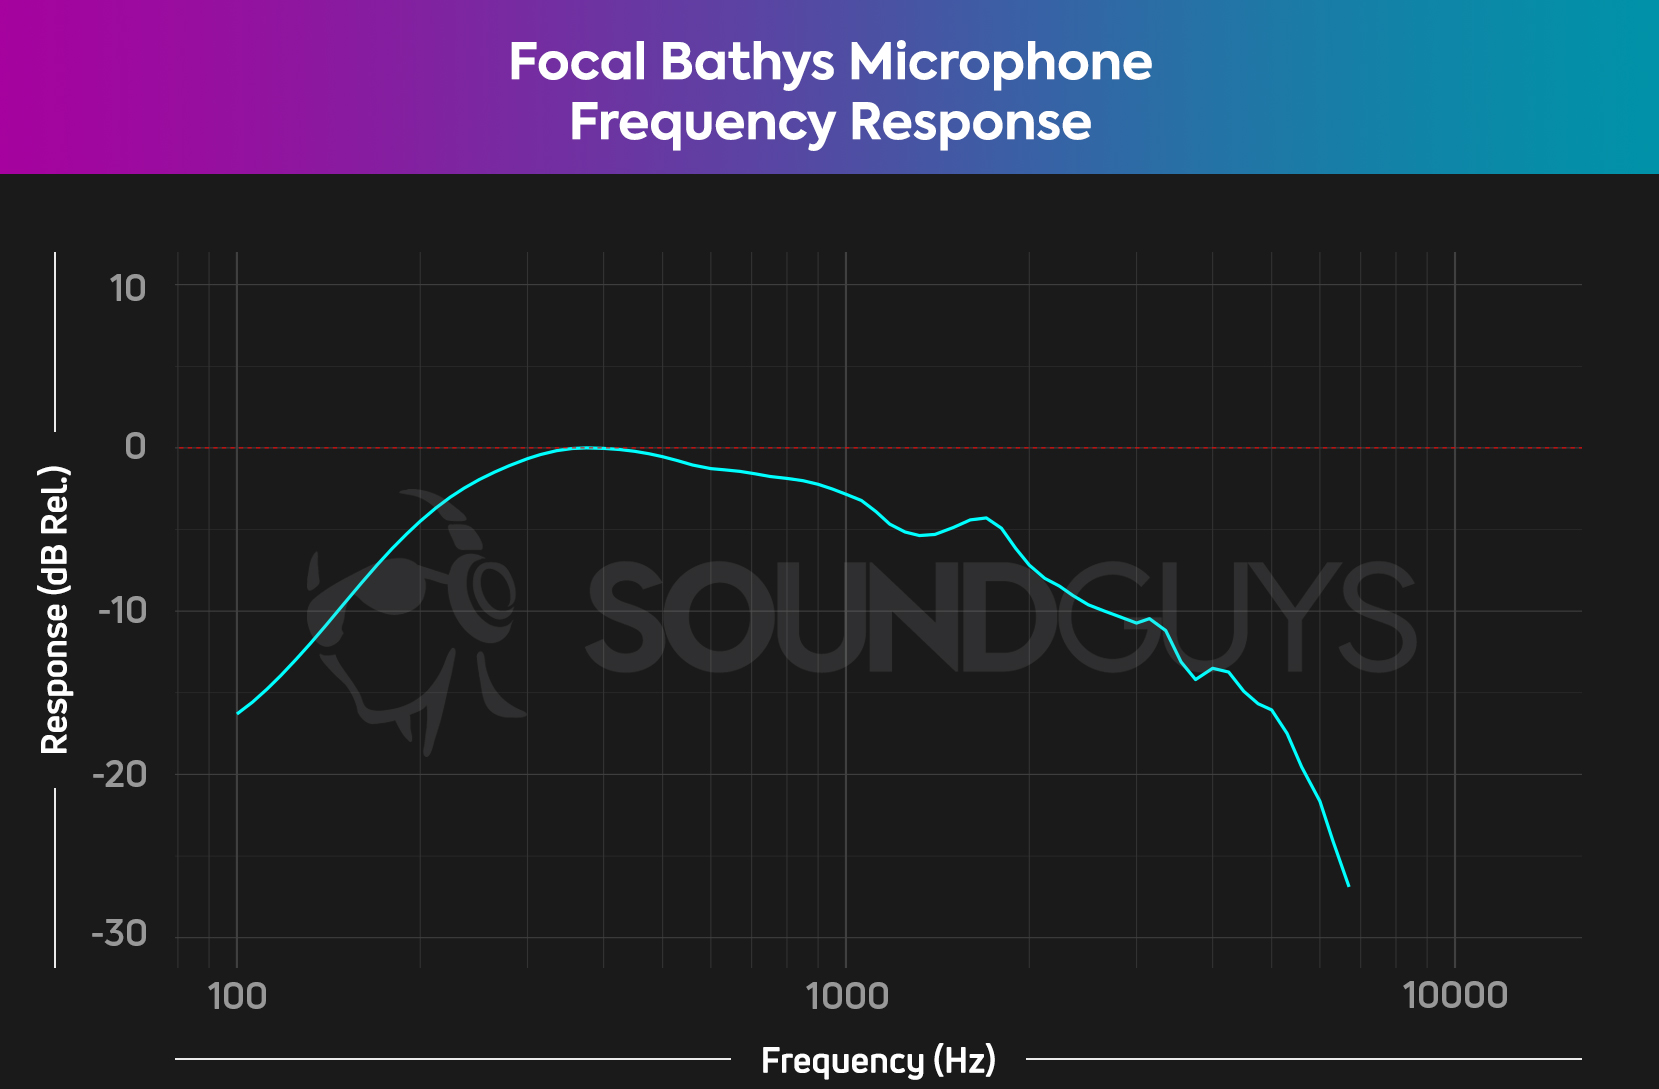 A microphone frequency response chart fro the focal bathys headphones.